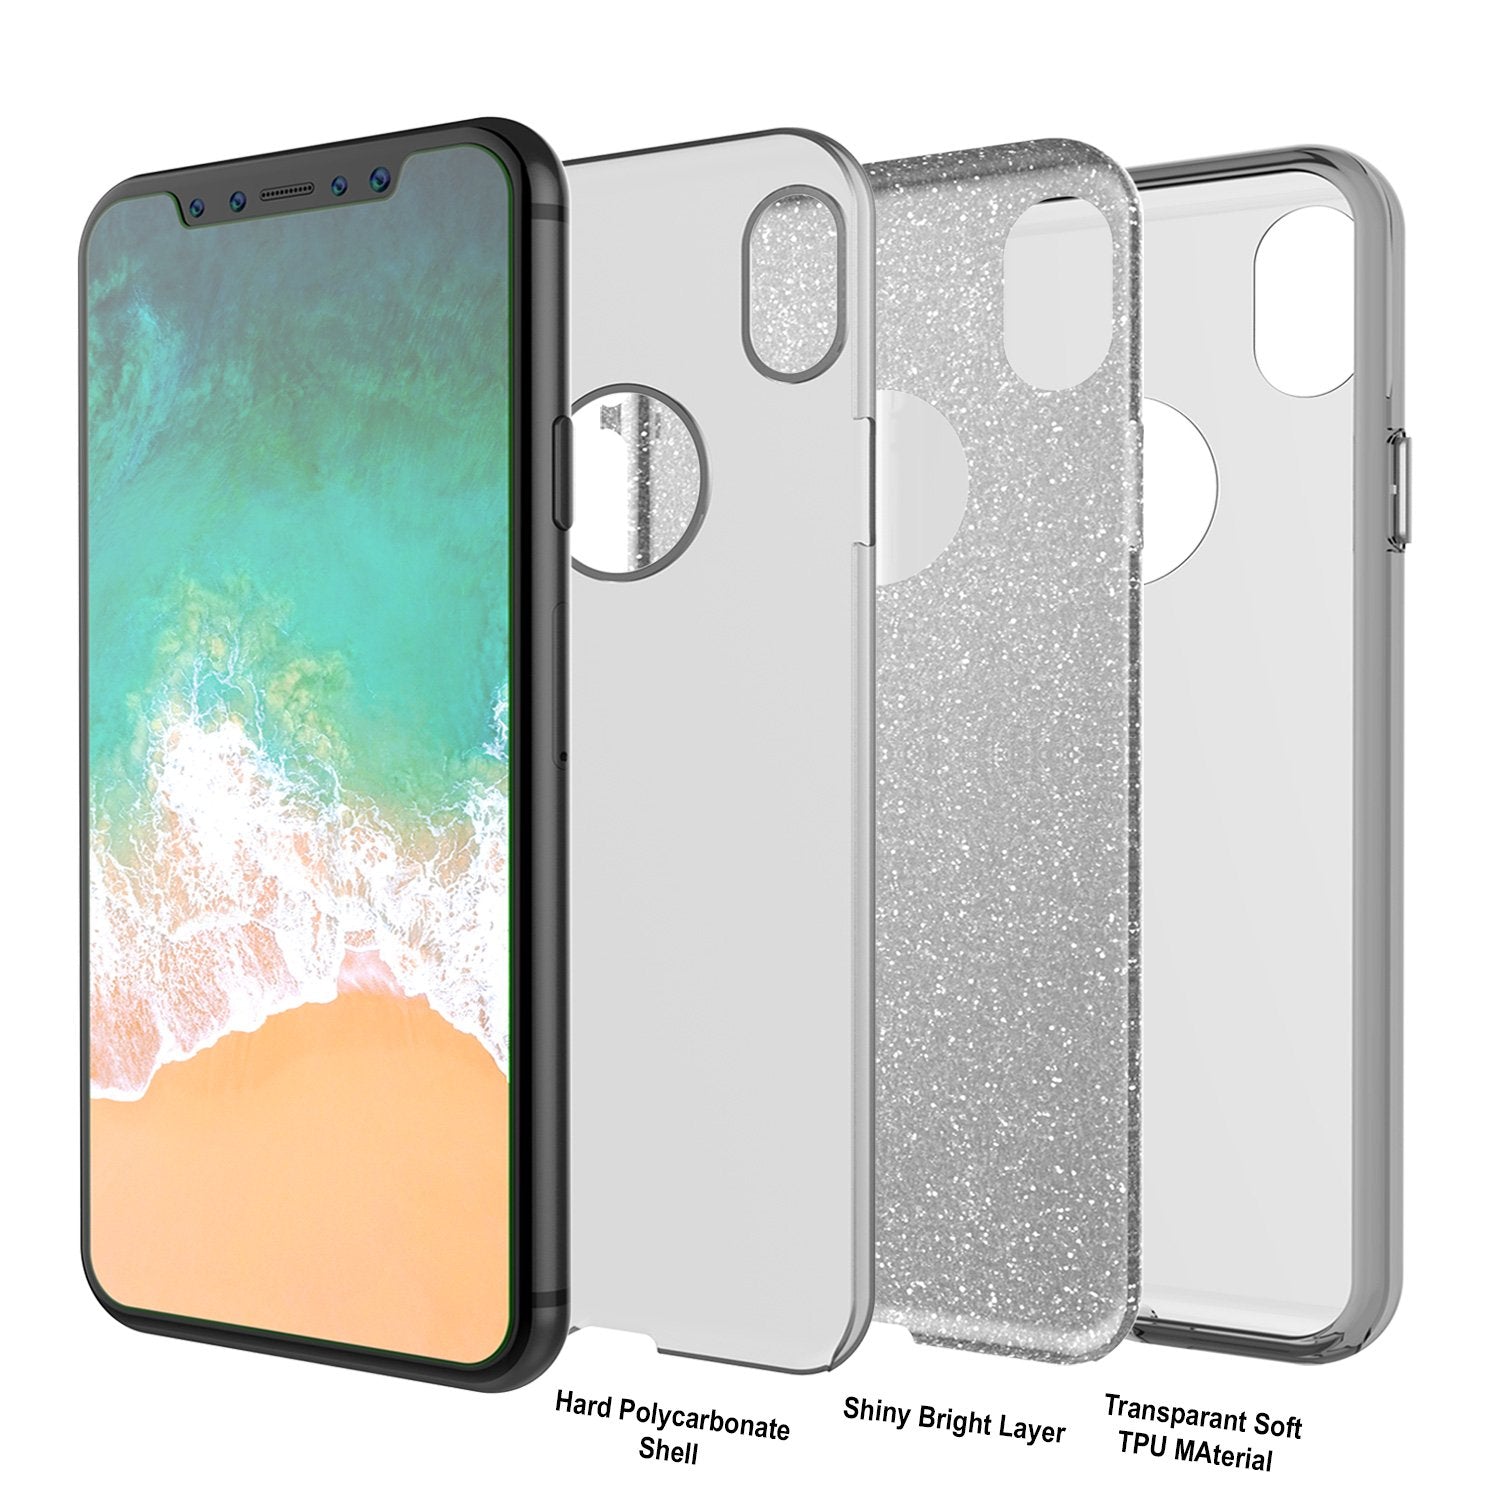 iPhone X Case, Punkcase Galactic 2.0 Series Ultra Slim Cover [Silver]